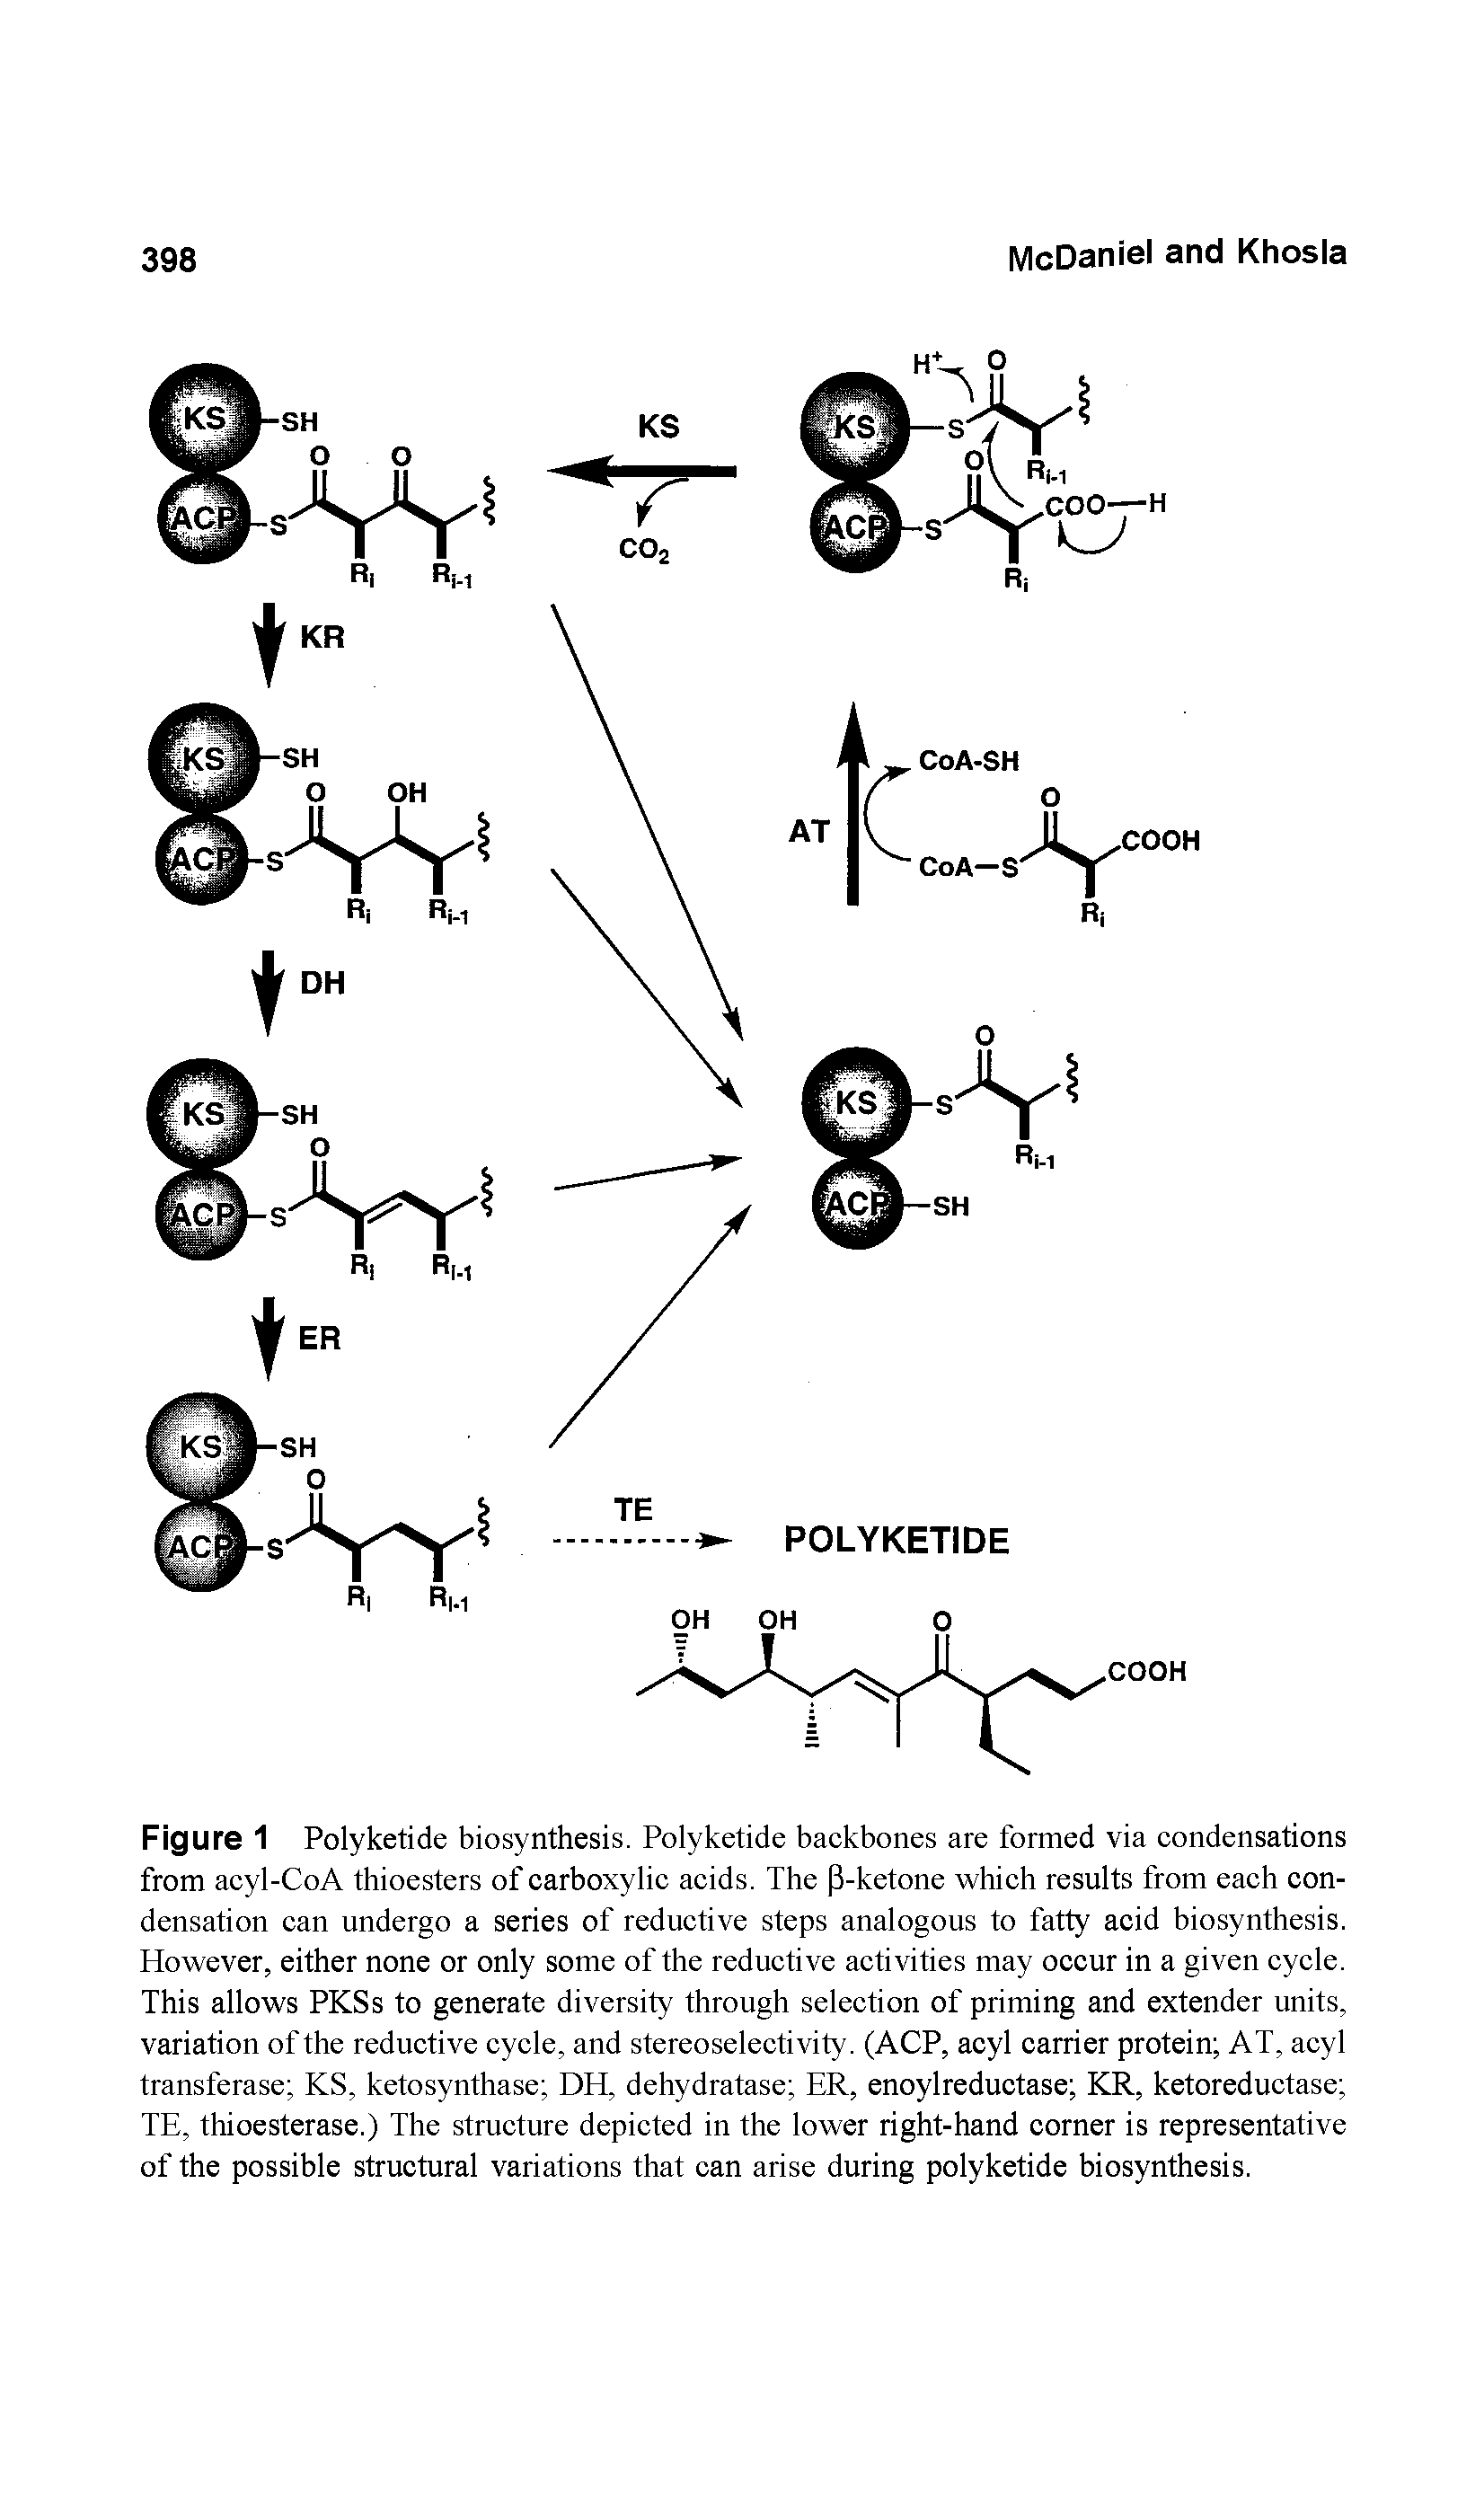 Figure 1 Polyketide biosynthesis. Polyketide backbones are formed via condensations from acyl-CoA thioesters of carboxylic acids. The (3-ketone which results from each condensation can undergo a series of reductive steps analogous to fatty acid biosynthesis. However, either none or only some of the reductive activities may occur in a given cycle. This allows PKSs to generate diversity through selection of priming and extender units, variation of the reductive cycle, and stereoselectivity. (ACP, acyl carrier protein AT, acyl transferase KS, ketosynthase DH, dehydratase ER, enoylreductase KR, ketoreductase TE, thioesterase.) The structure depicted in the lower right-hand corner is representative of the possible structural variations that can arise during polyketide biosynthesis.